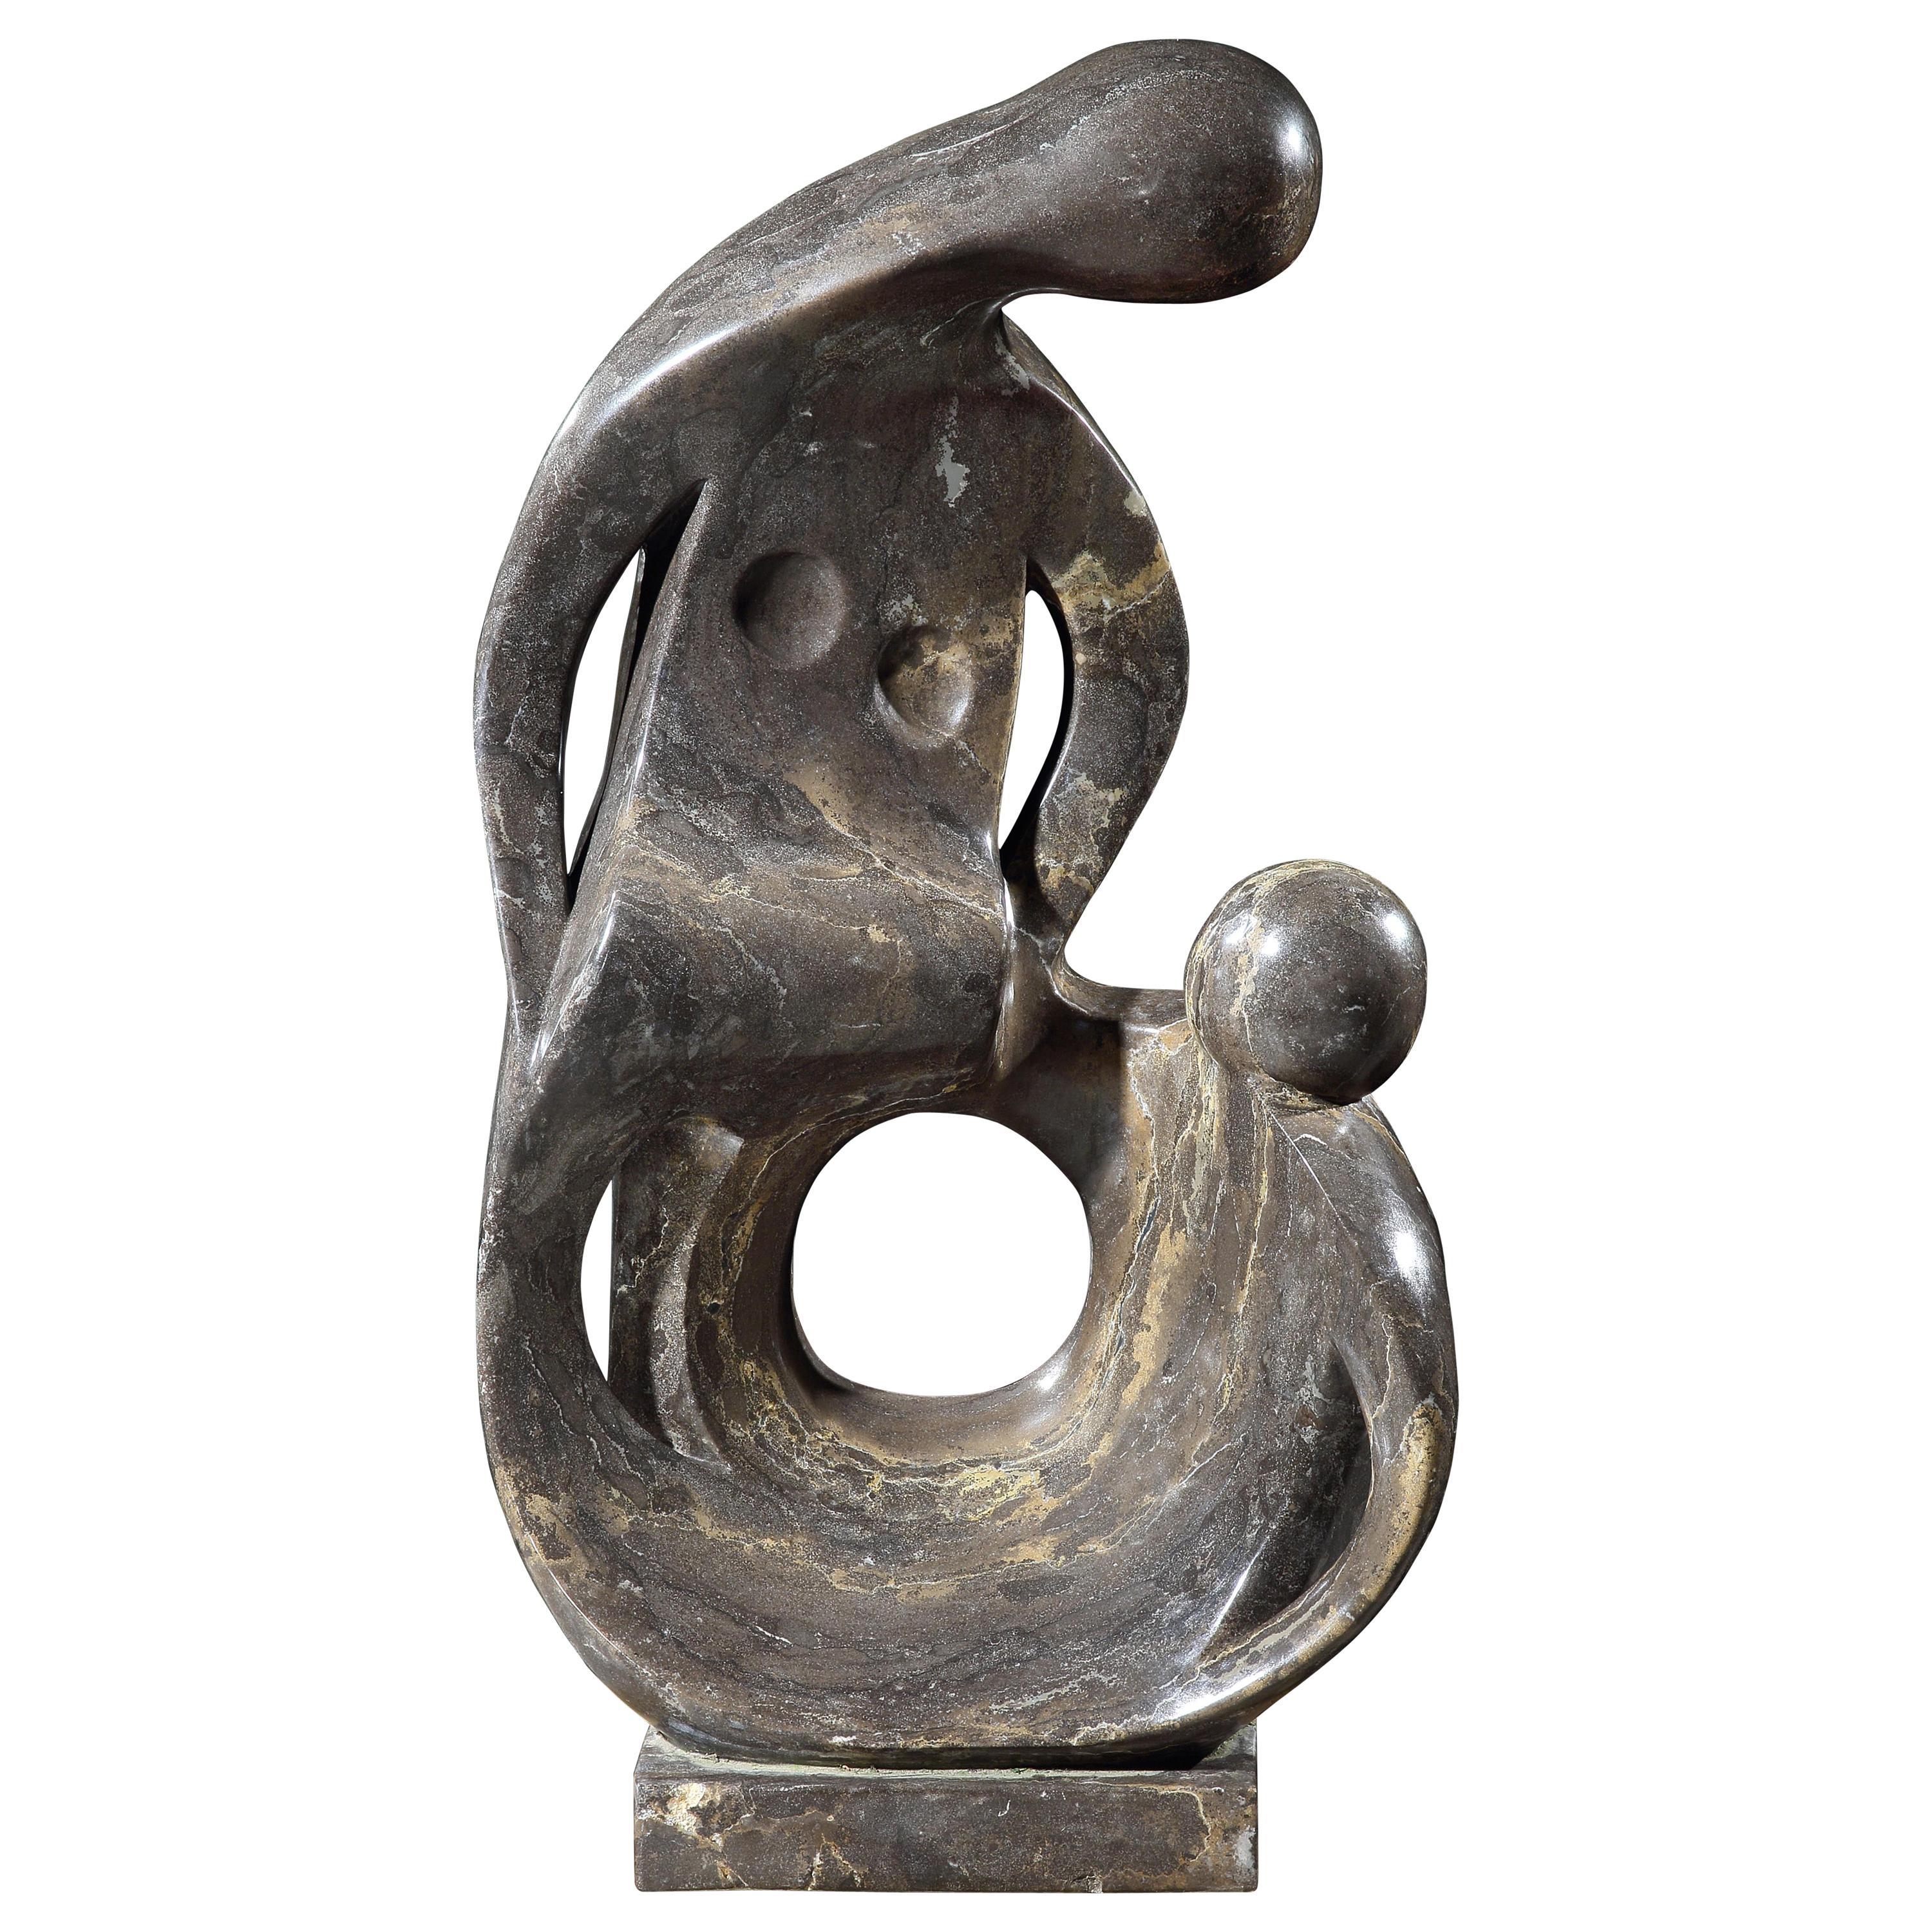 Unknown Abstract Sculpture - Sculpture Marble Mother & Child Biomorphic 3ft 10in high Modernist Abstract